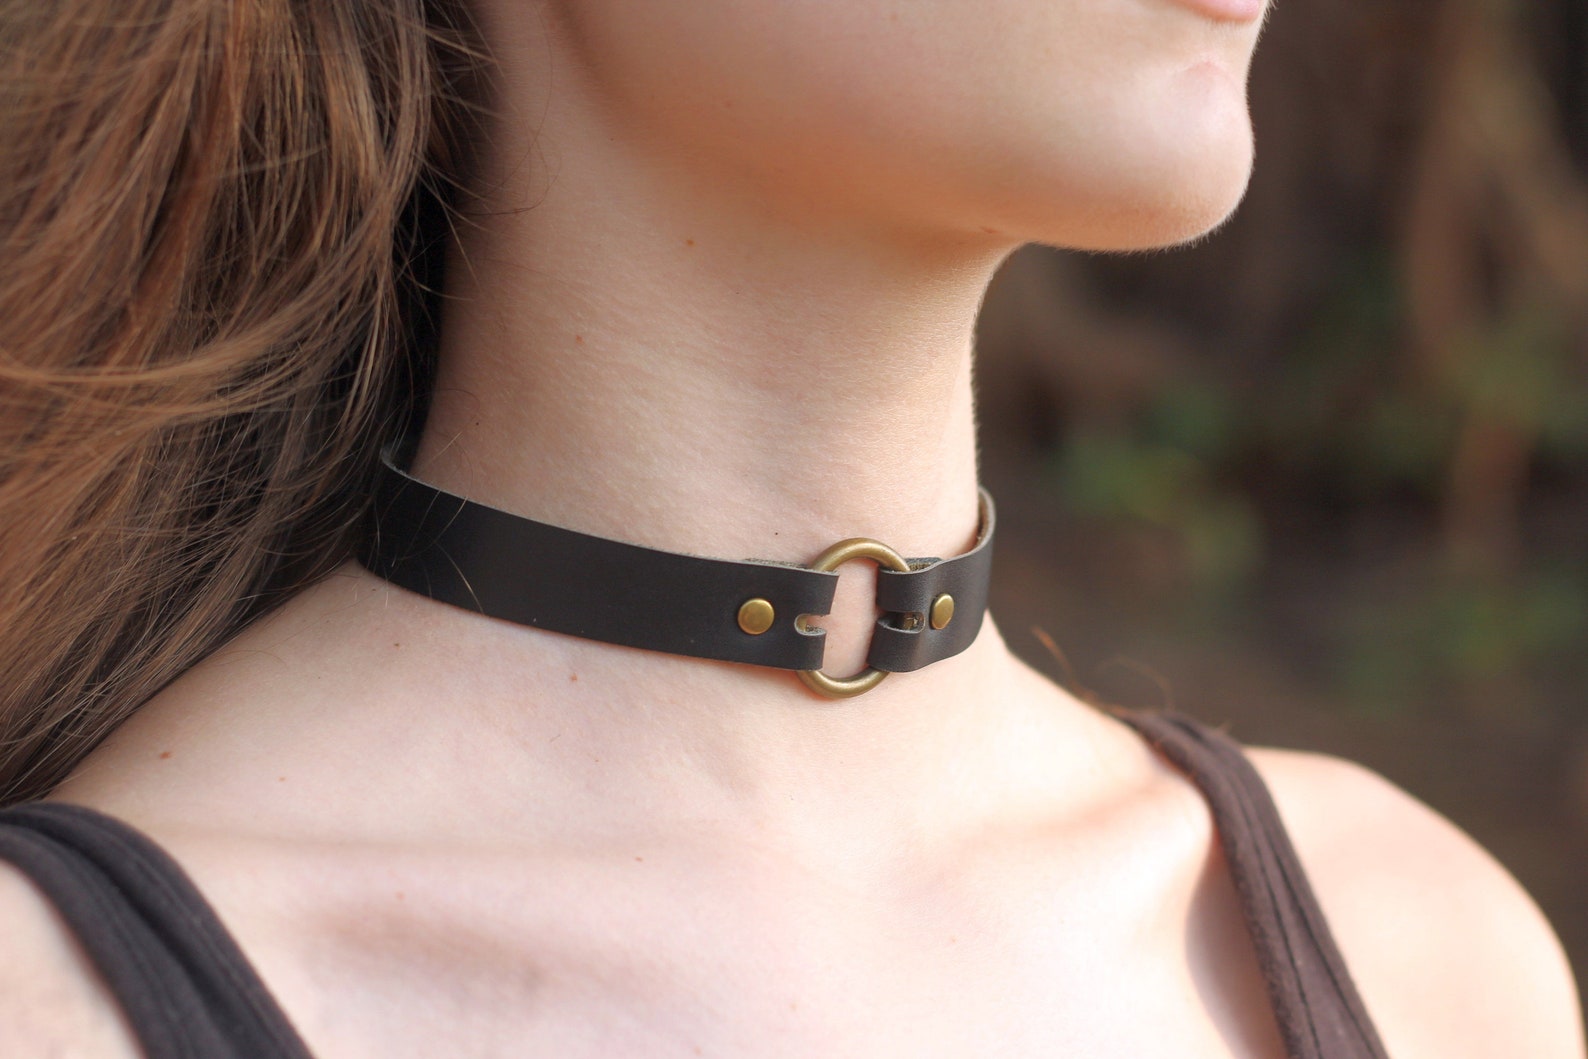 O Ring Leather Choker In Bdsm Style Black Collar For Etsy